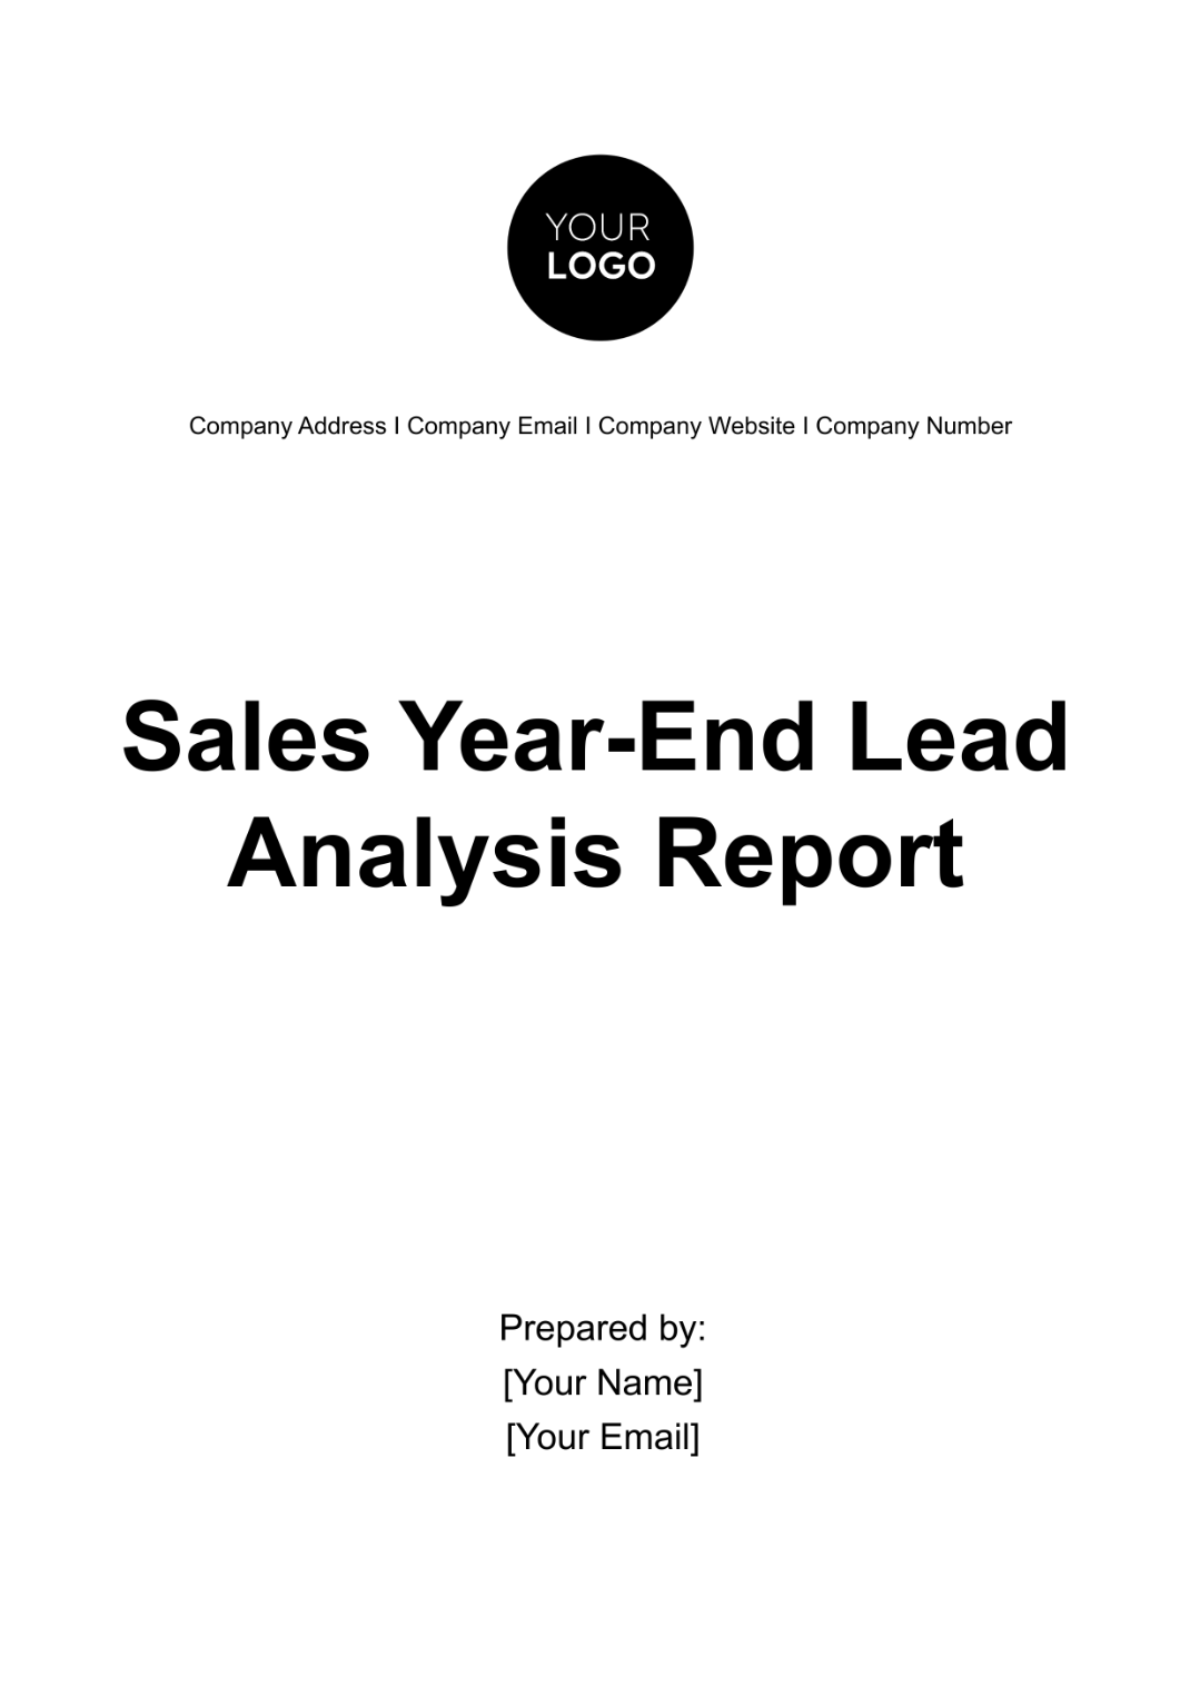 Free Sales Year-End Lead Analysis Report Template